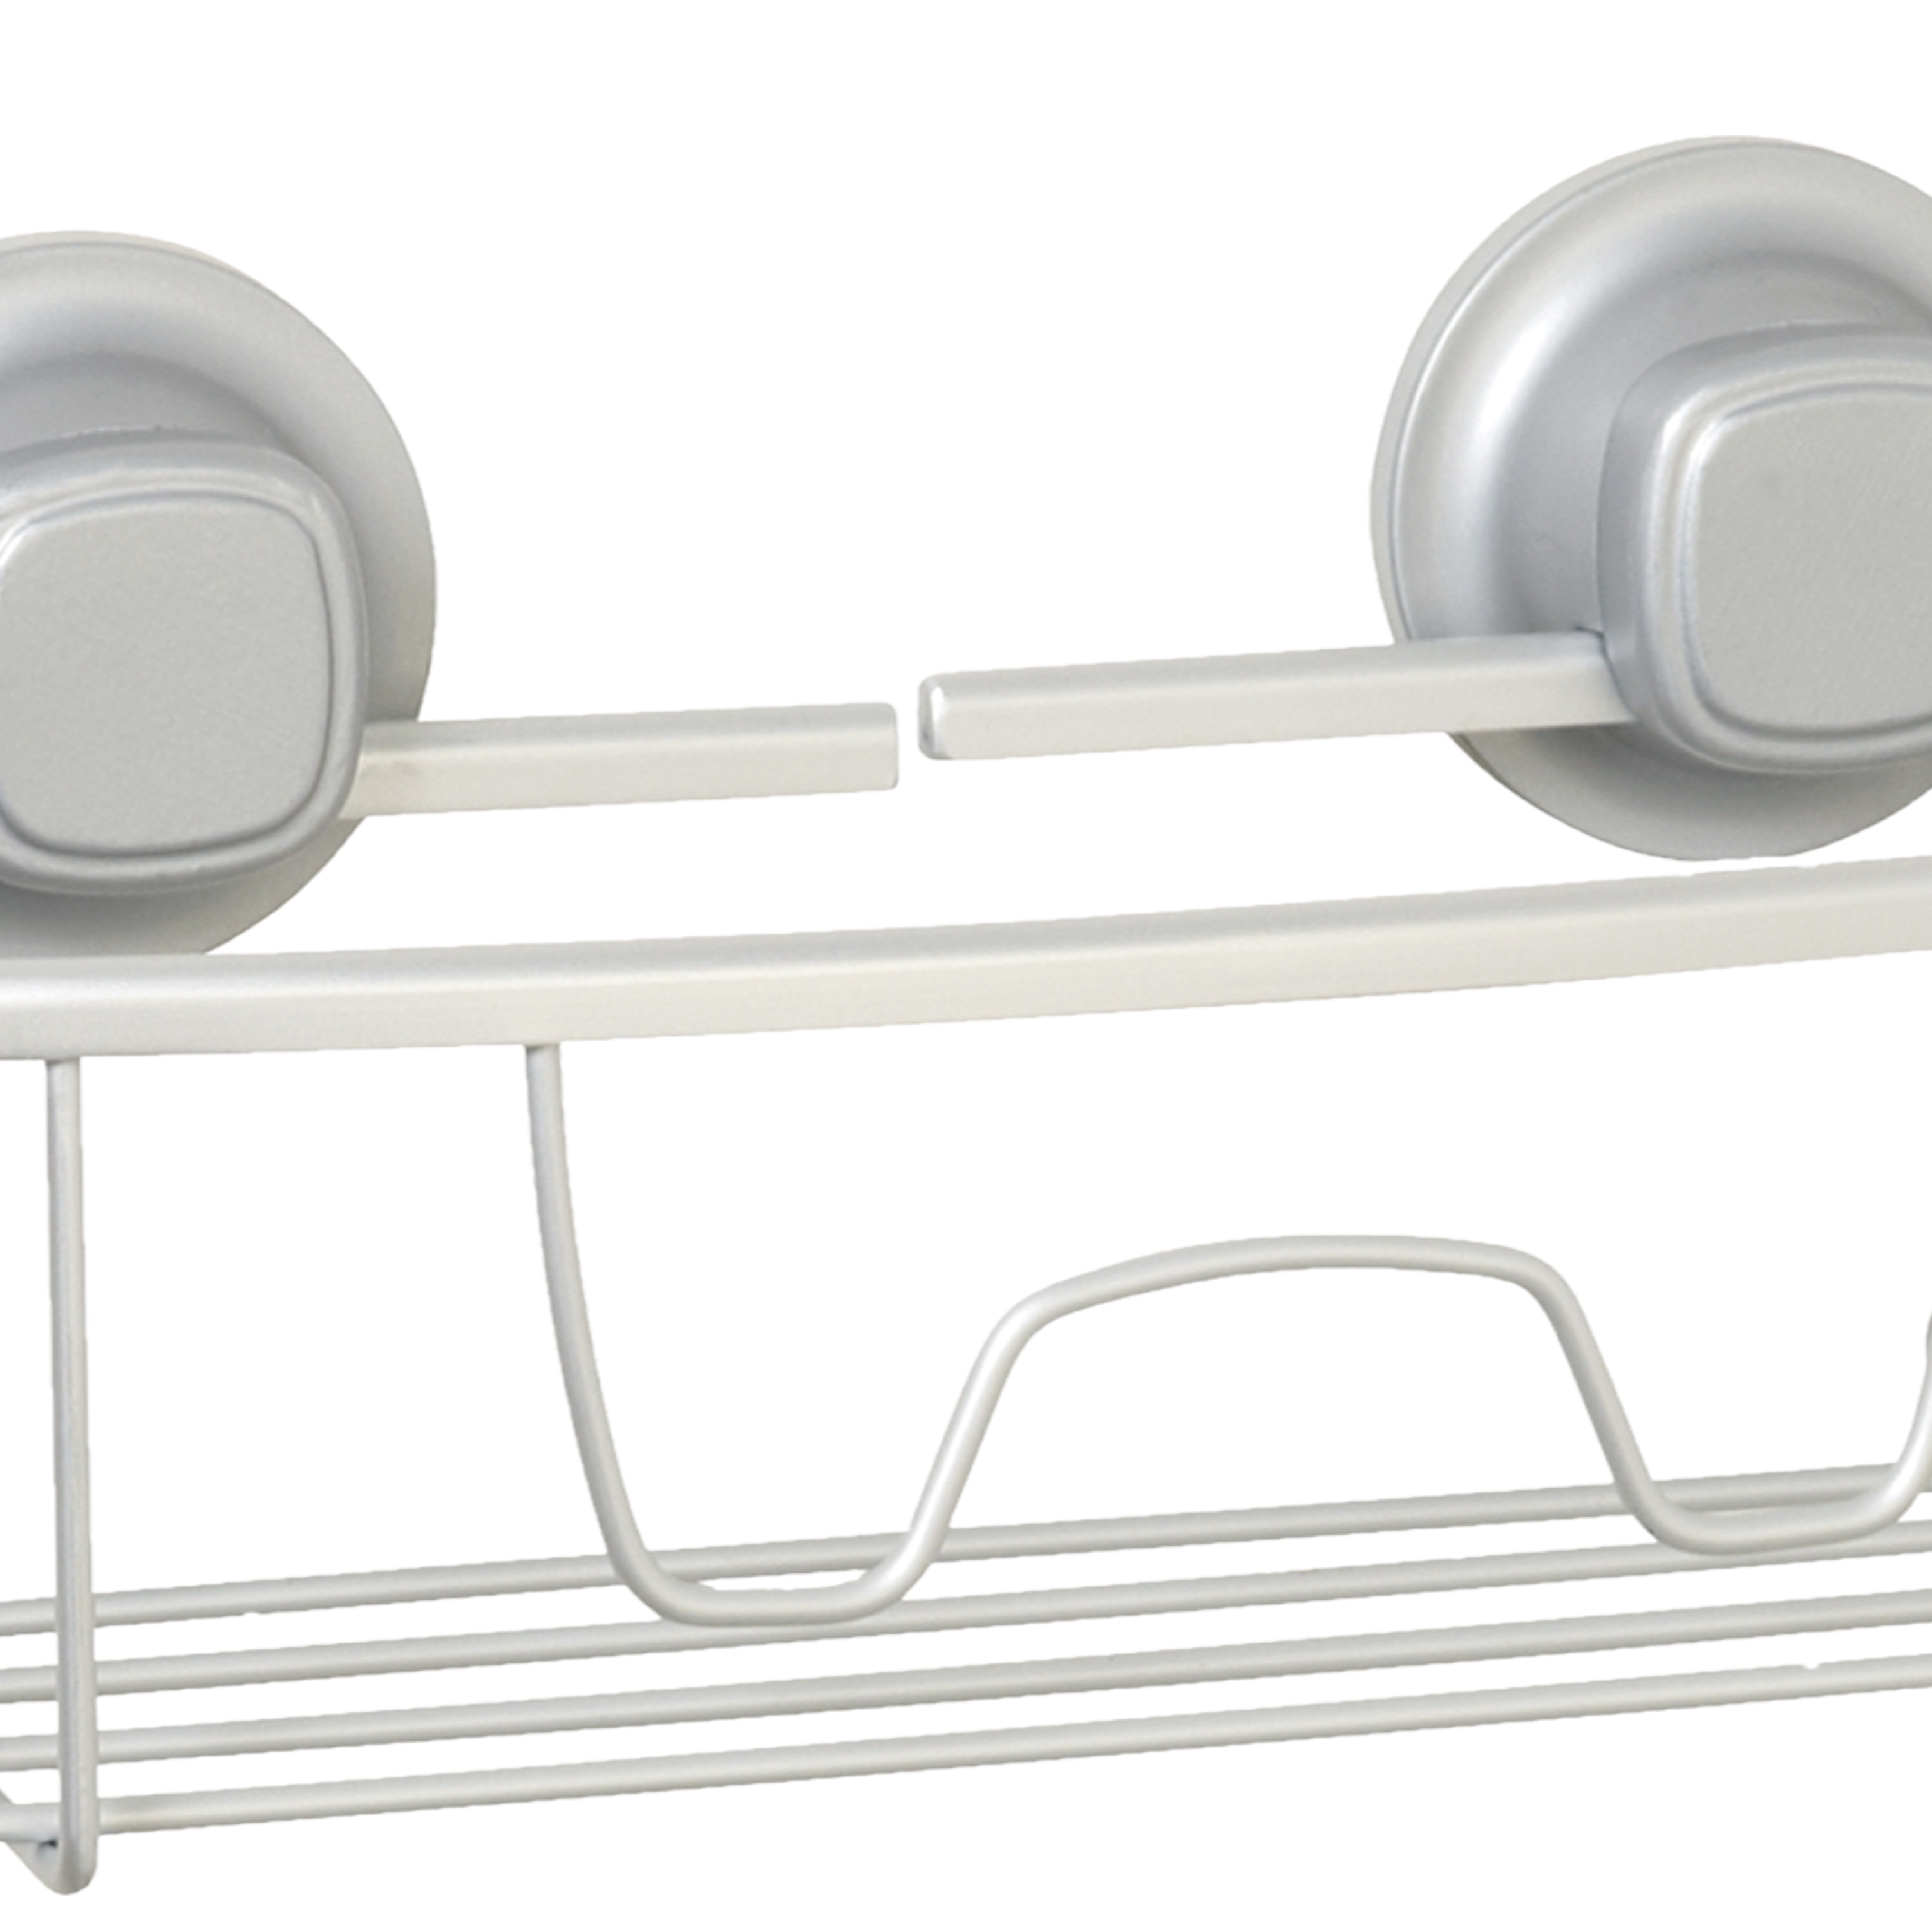 Rebrilliant Mahleek Suction Stainless Steel Shower Caddy